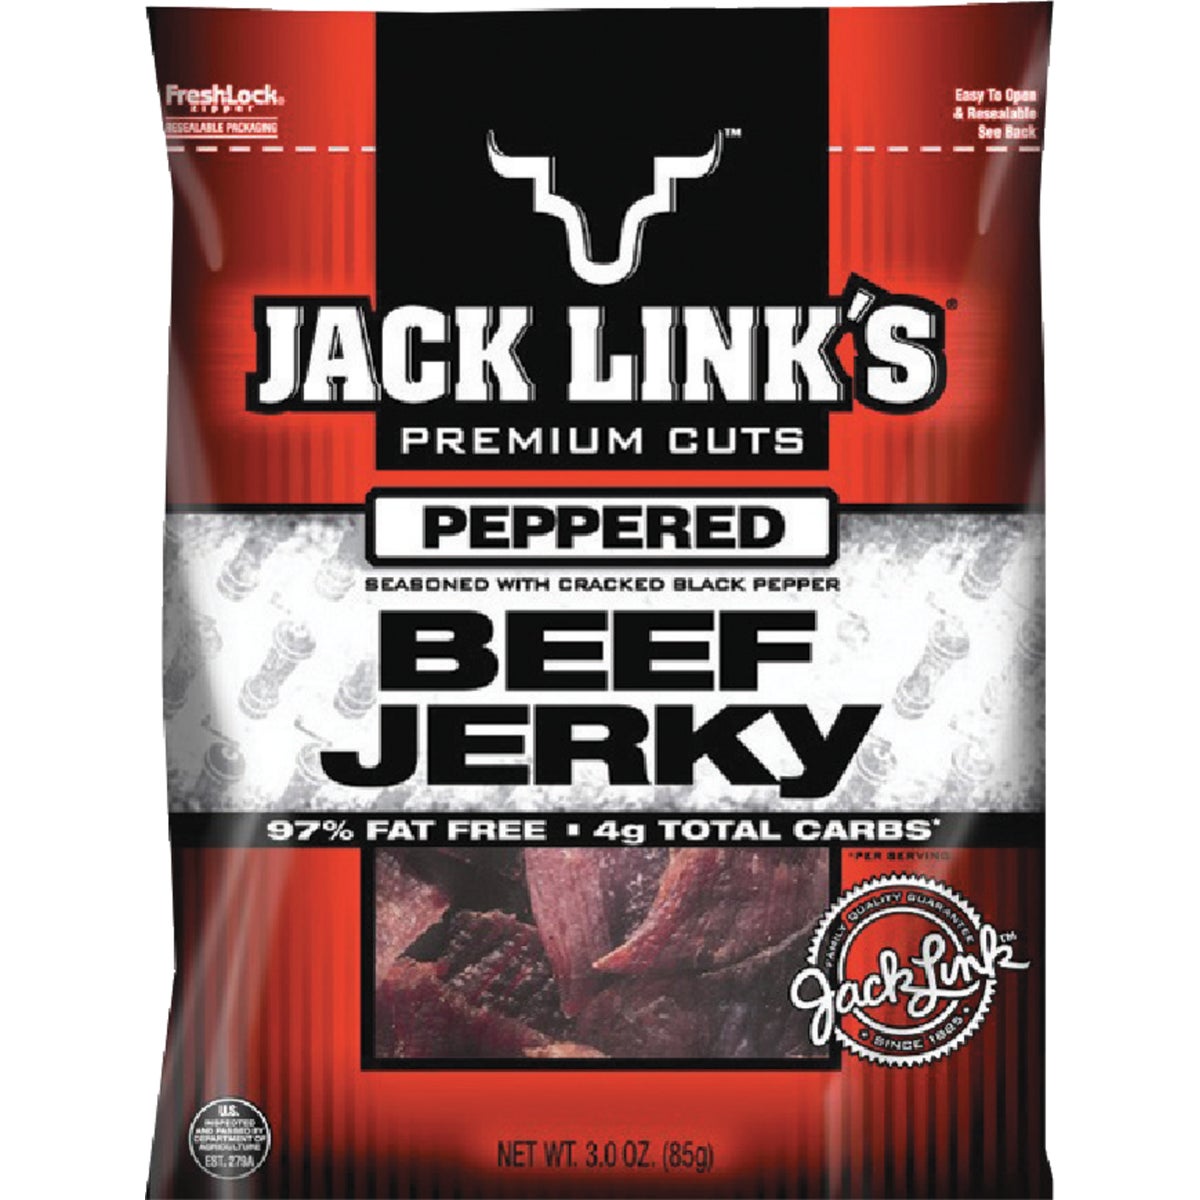 Jack Link's Premium Cuts 2.85 Oz. Peppered Beef Jerky